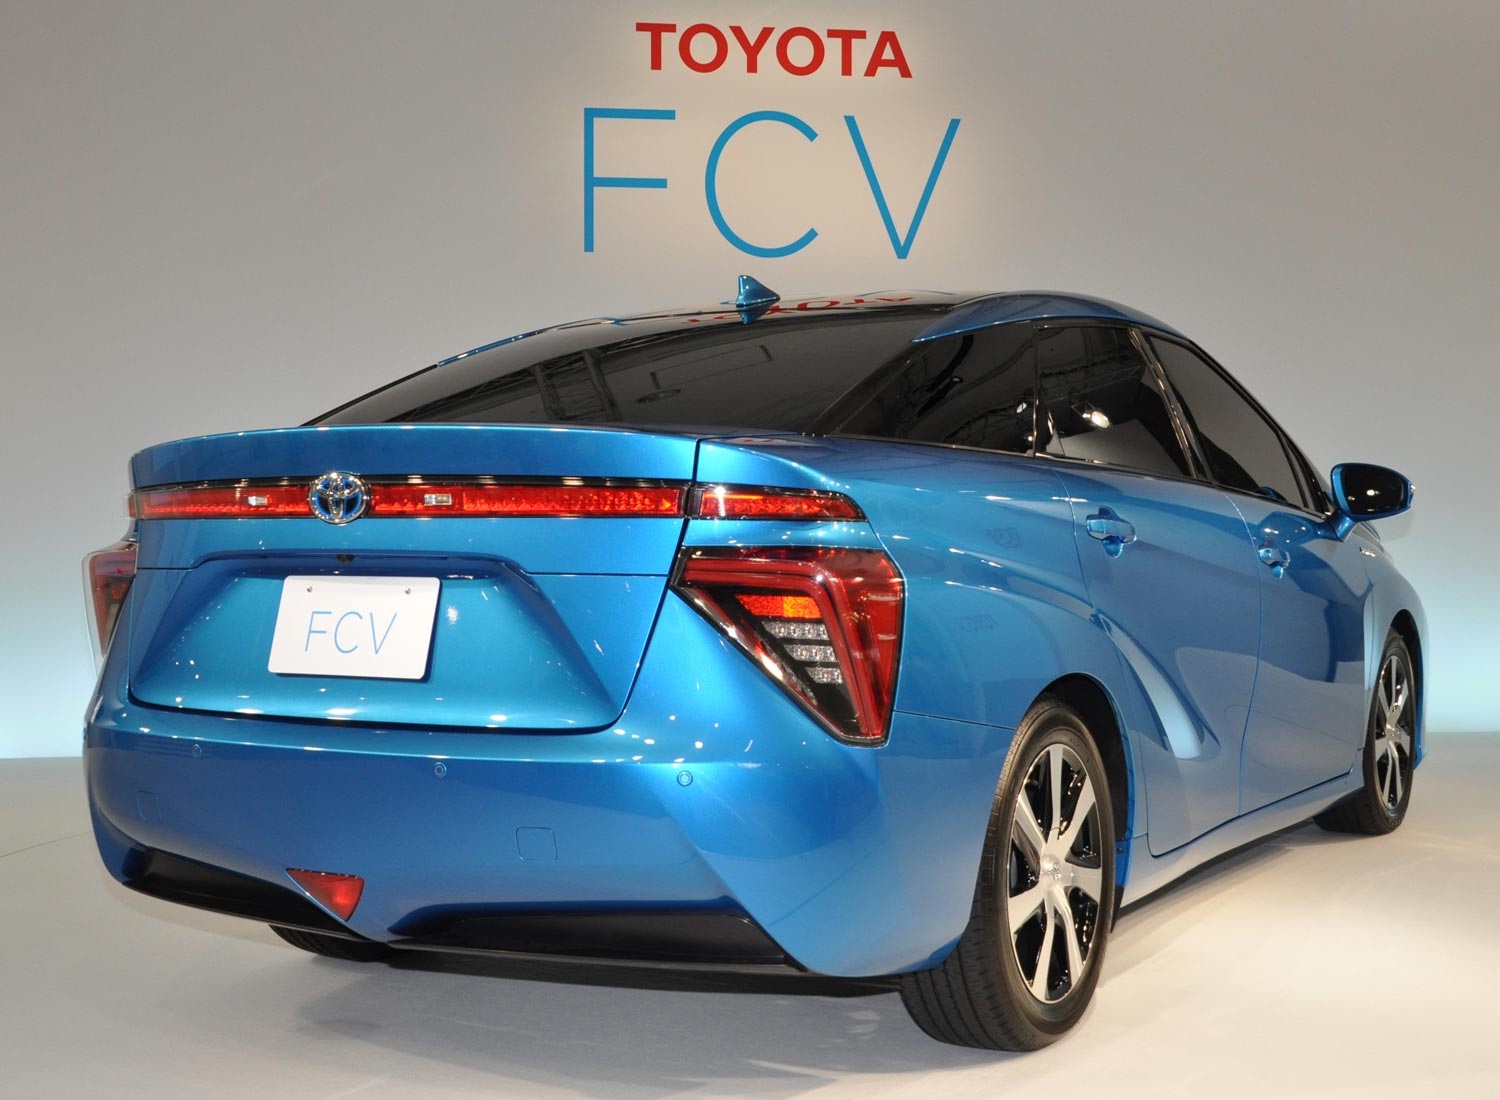 Toyota-Mirai-The-Future-Hydrogen-Fuel-cell-car-from-Toyota